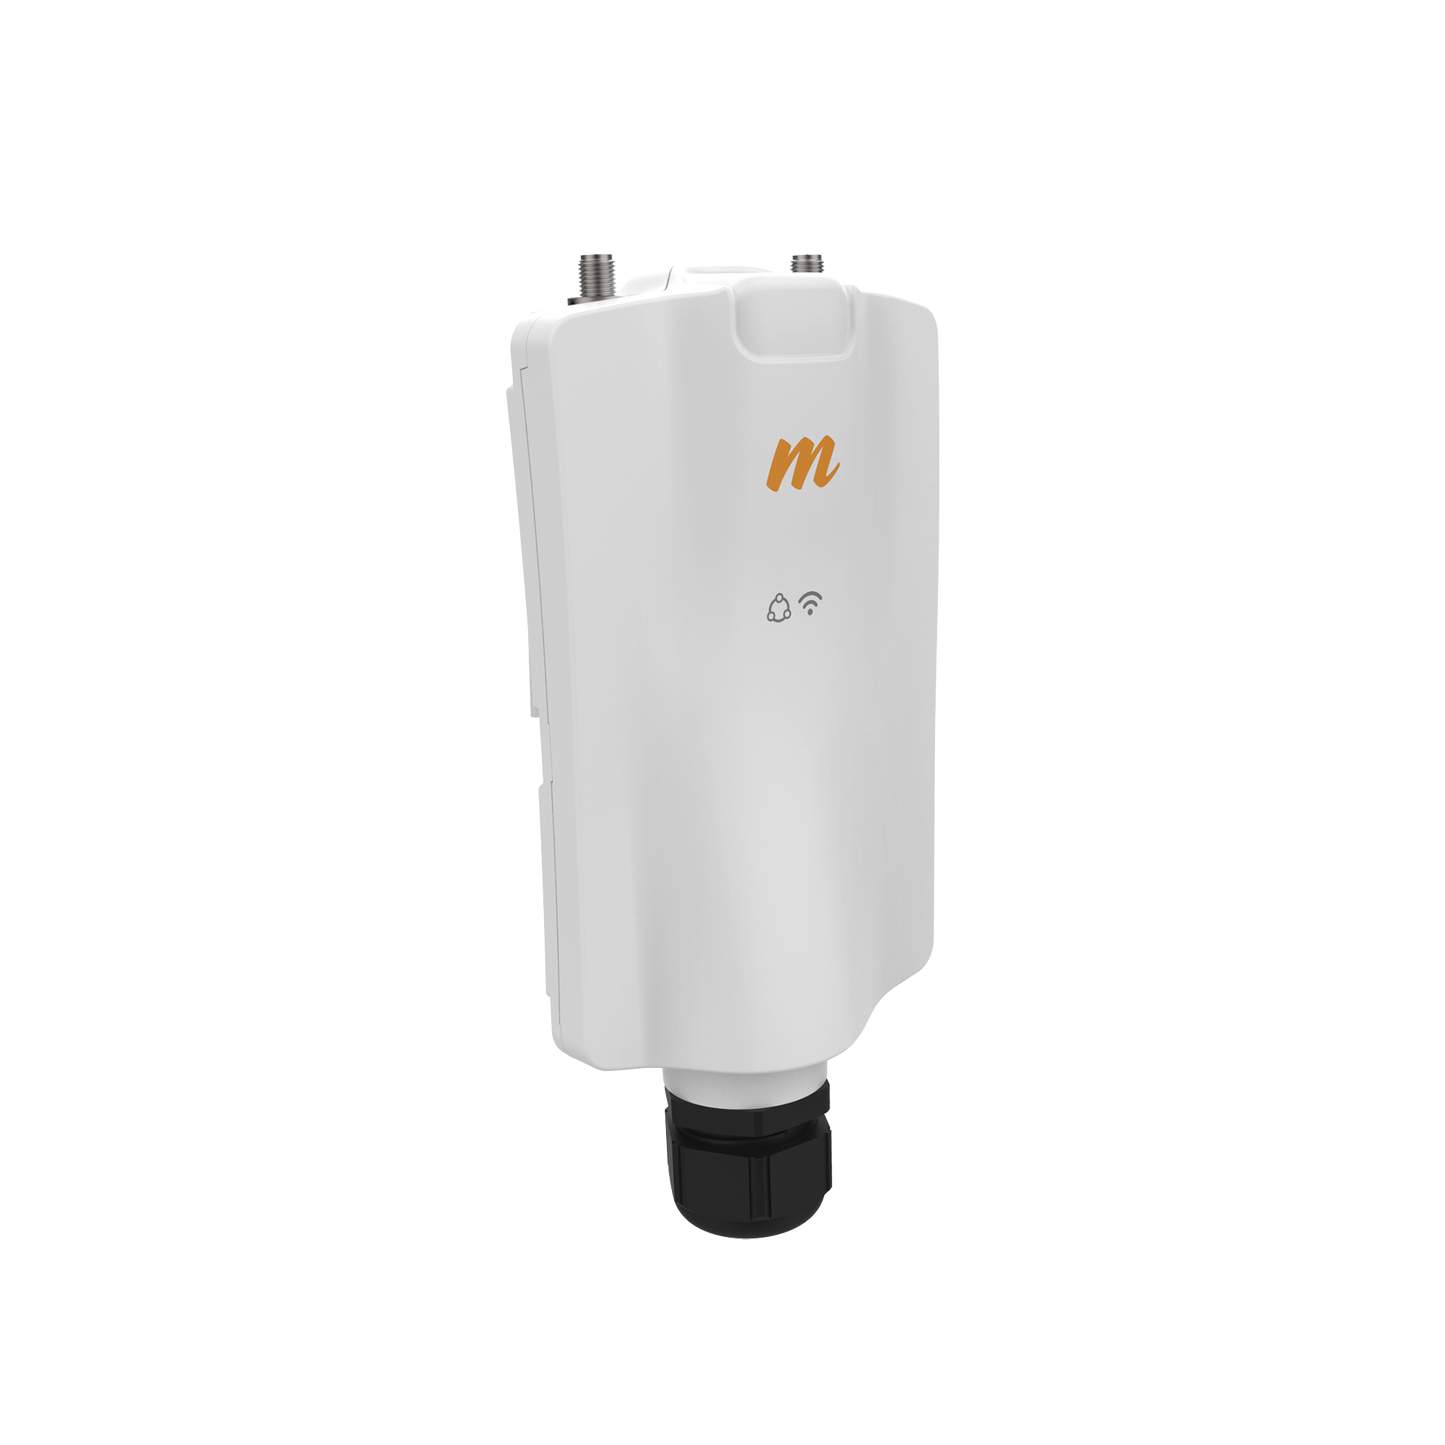 MU-MIMO 2x2 Access Point, 4.9-6.4 GHz, IP 67, Connected, Multipoint Point up to 700 Mbps, 2 SMA-female connectors, Automatic adaptation to the environment, Monitoring through the cloud